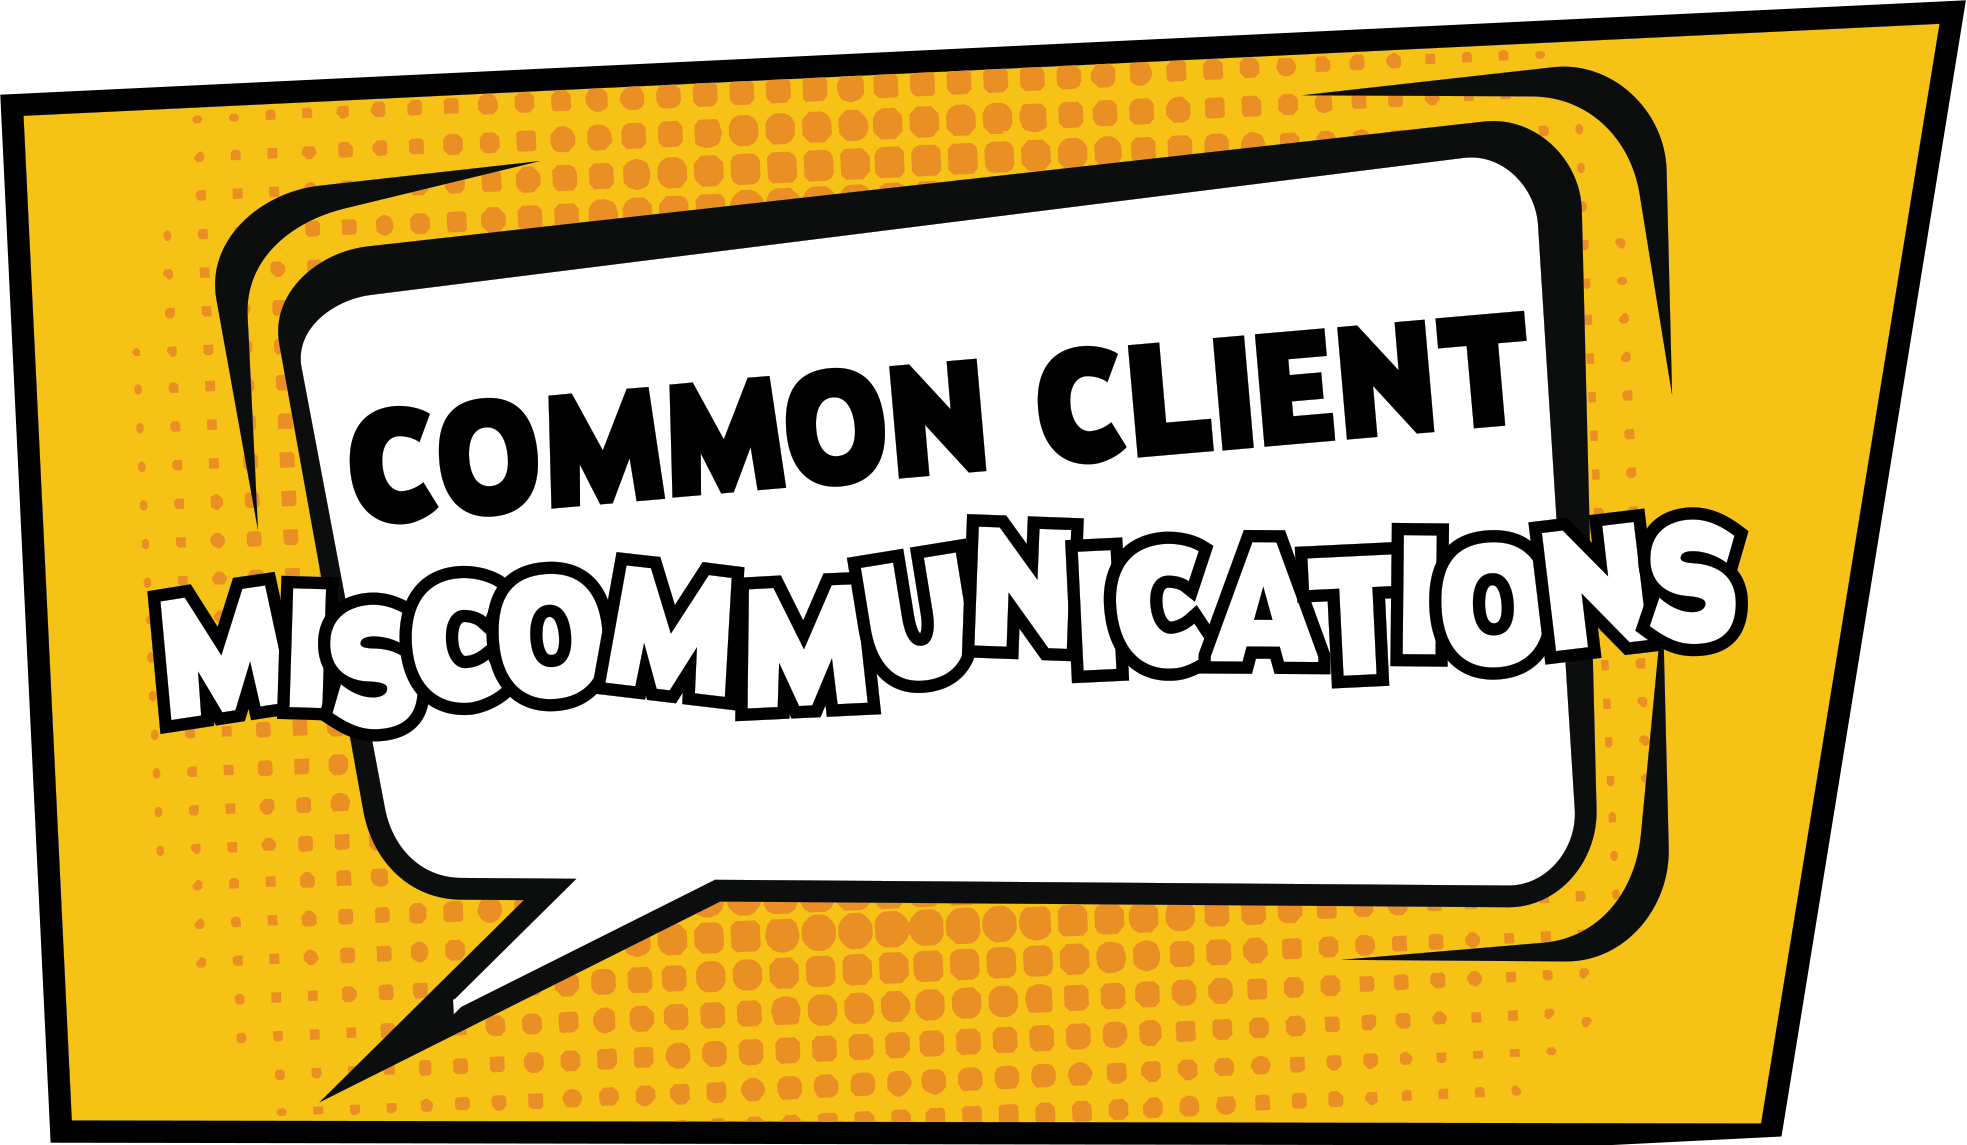 Common Client Miscommunications in orange comic style text box